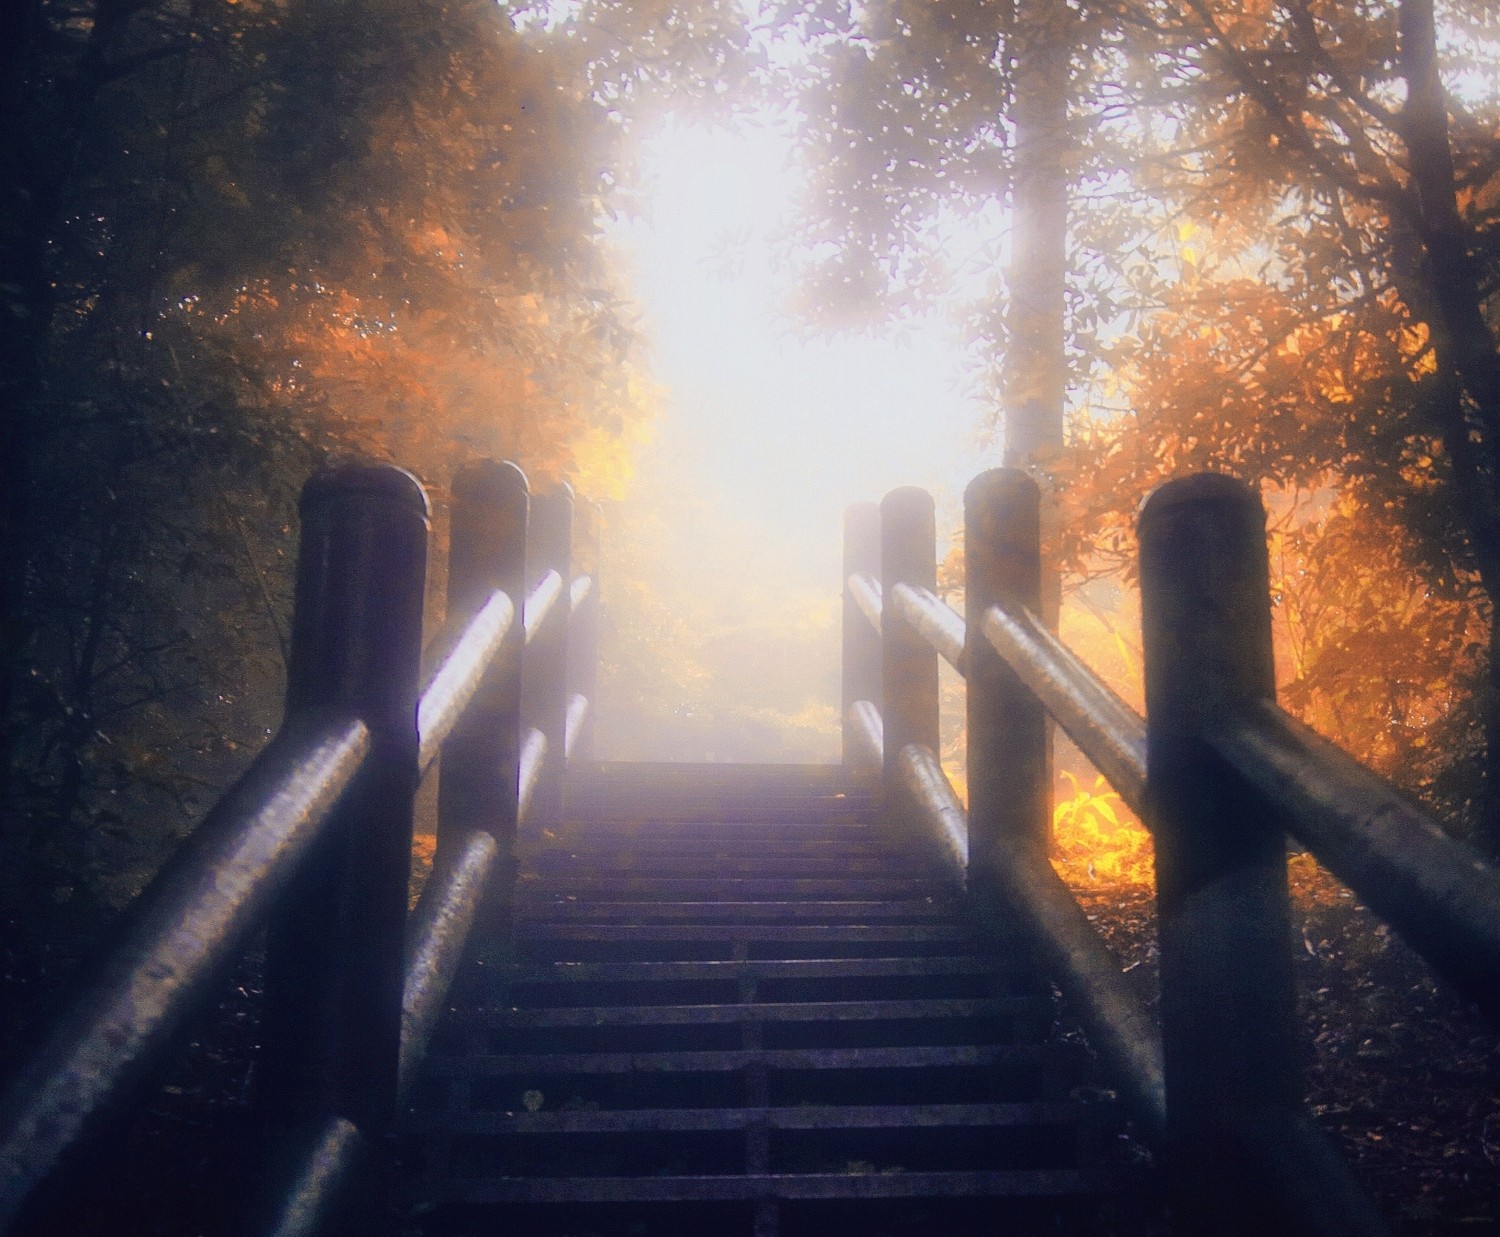 General 1500x1237 nature stairs mist trees leaves fall sunlight